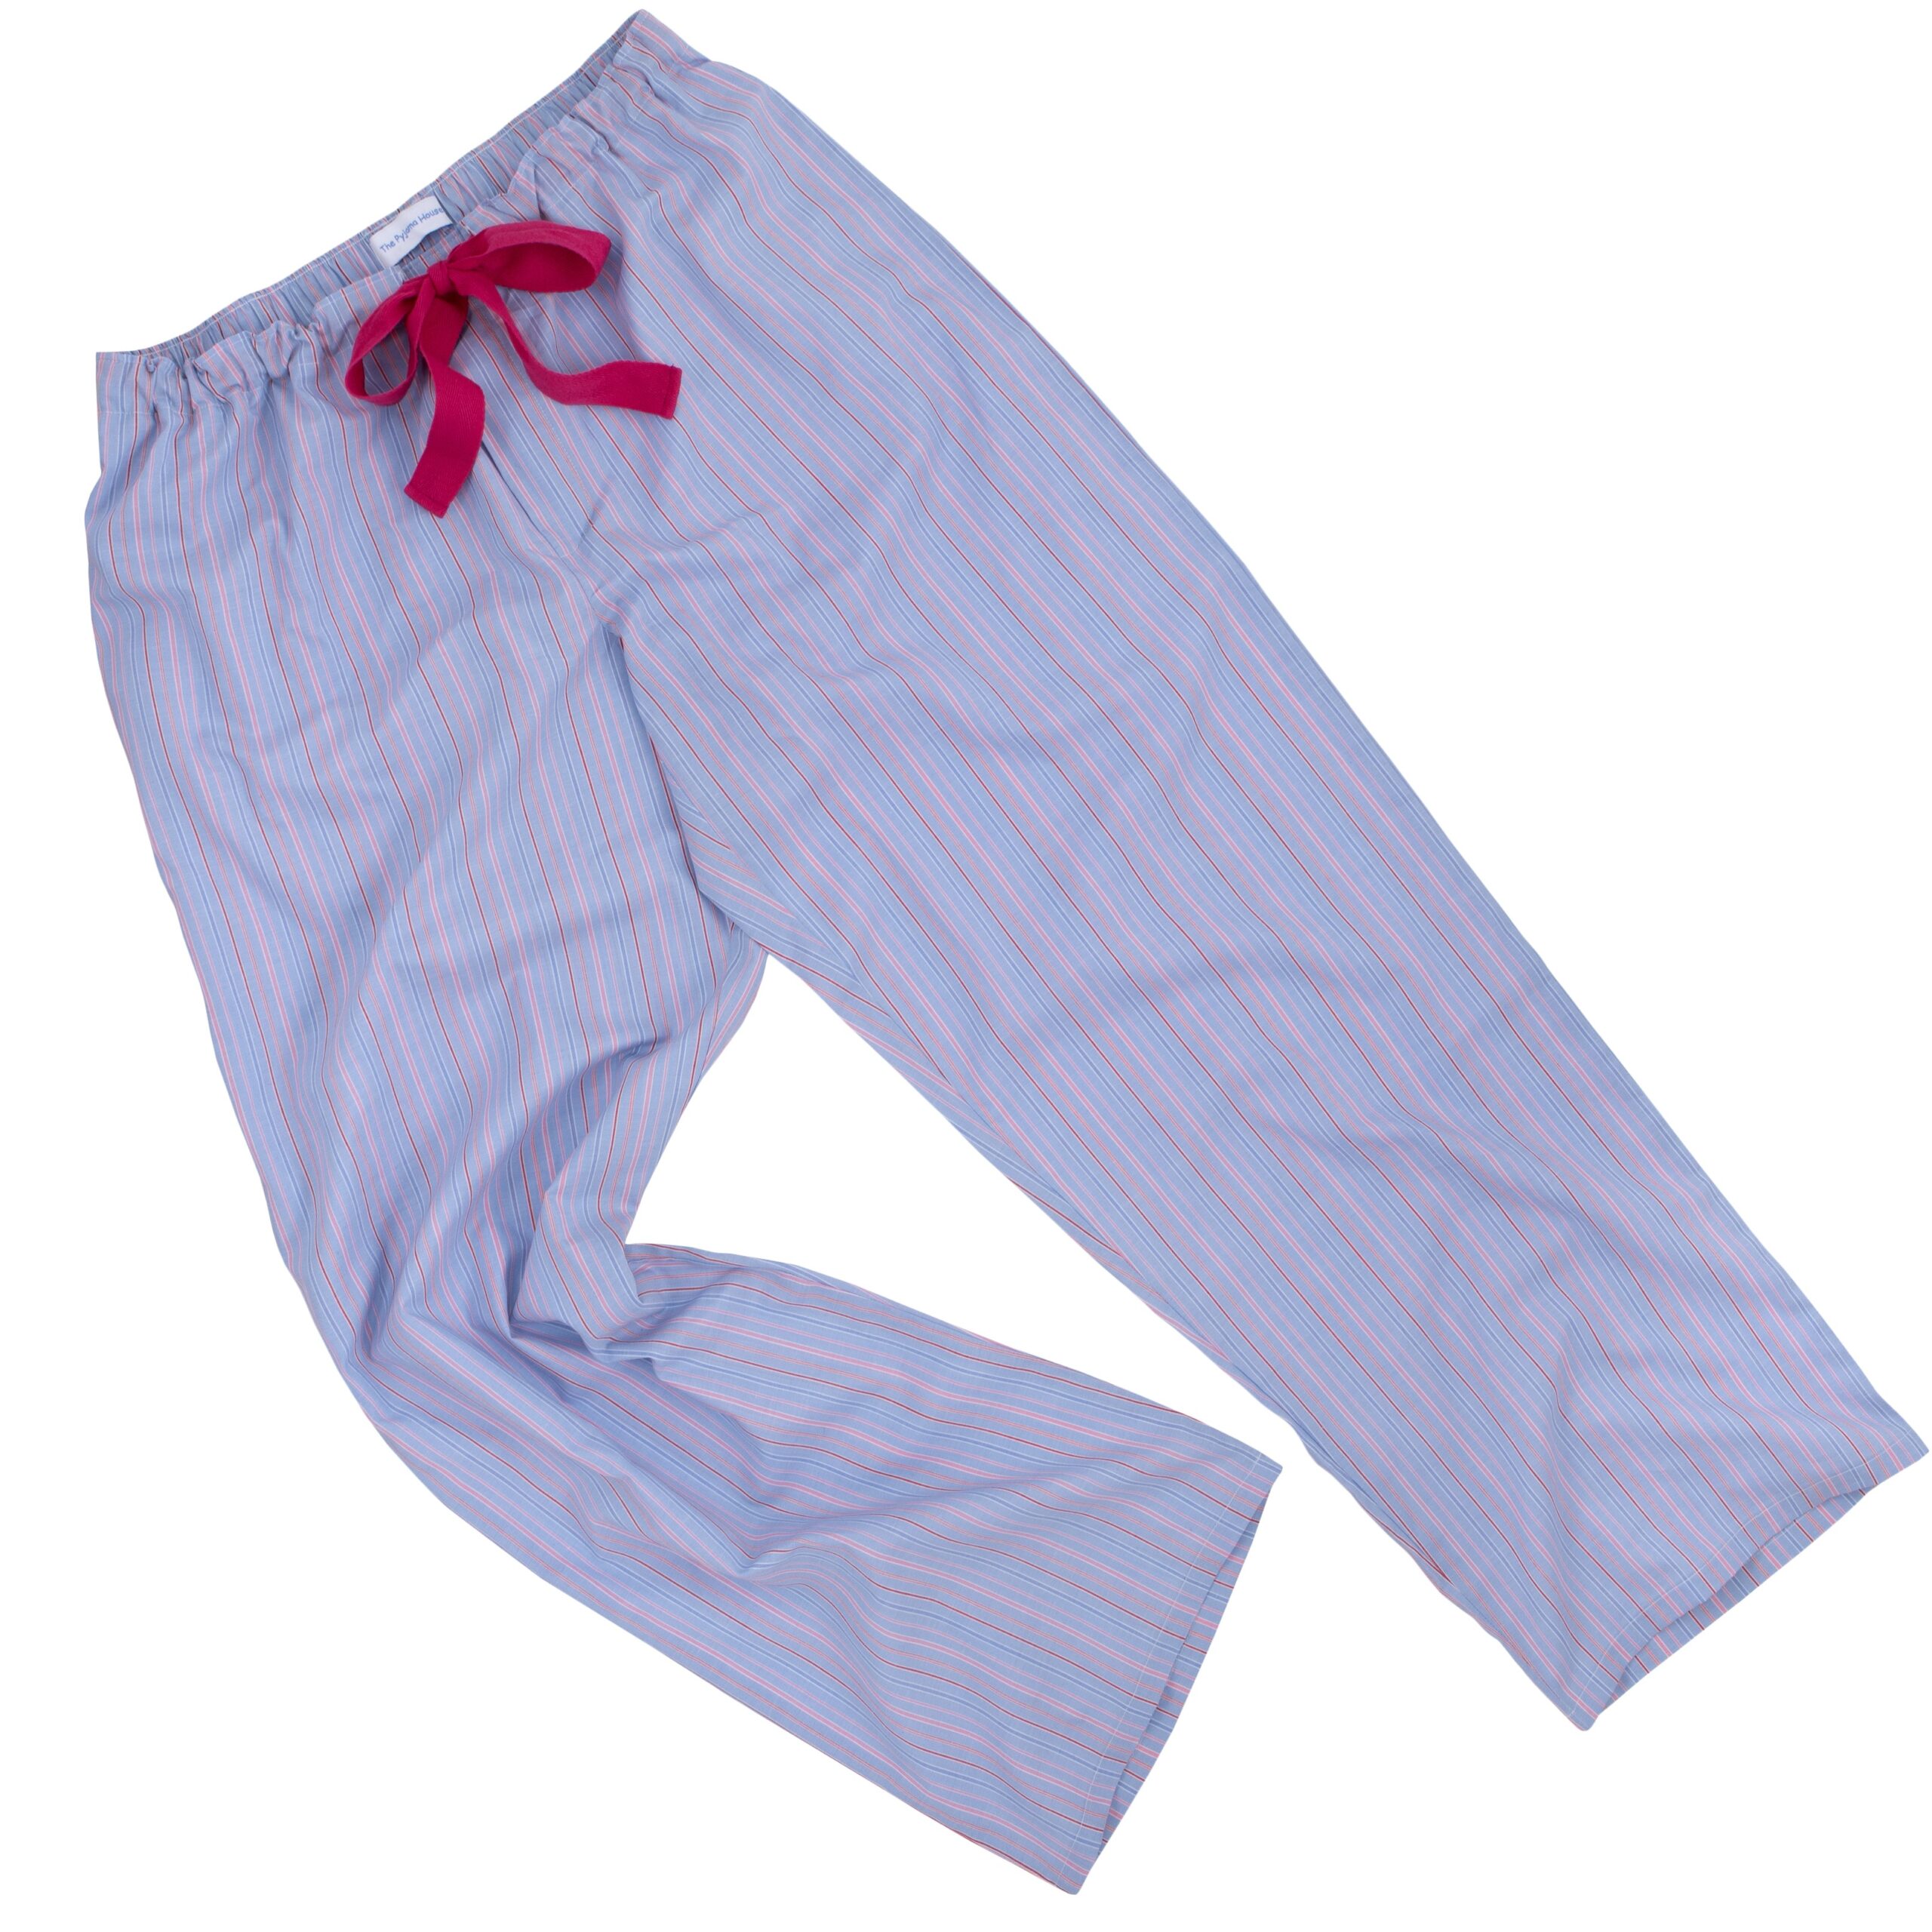 Fine cotton pj bottoms in blue multistripe with an adujstable raspberry red tie.